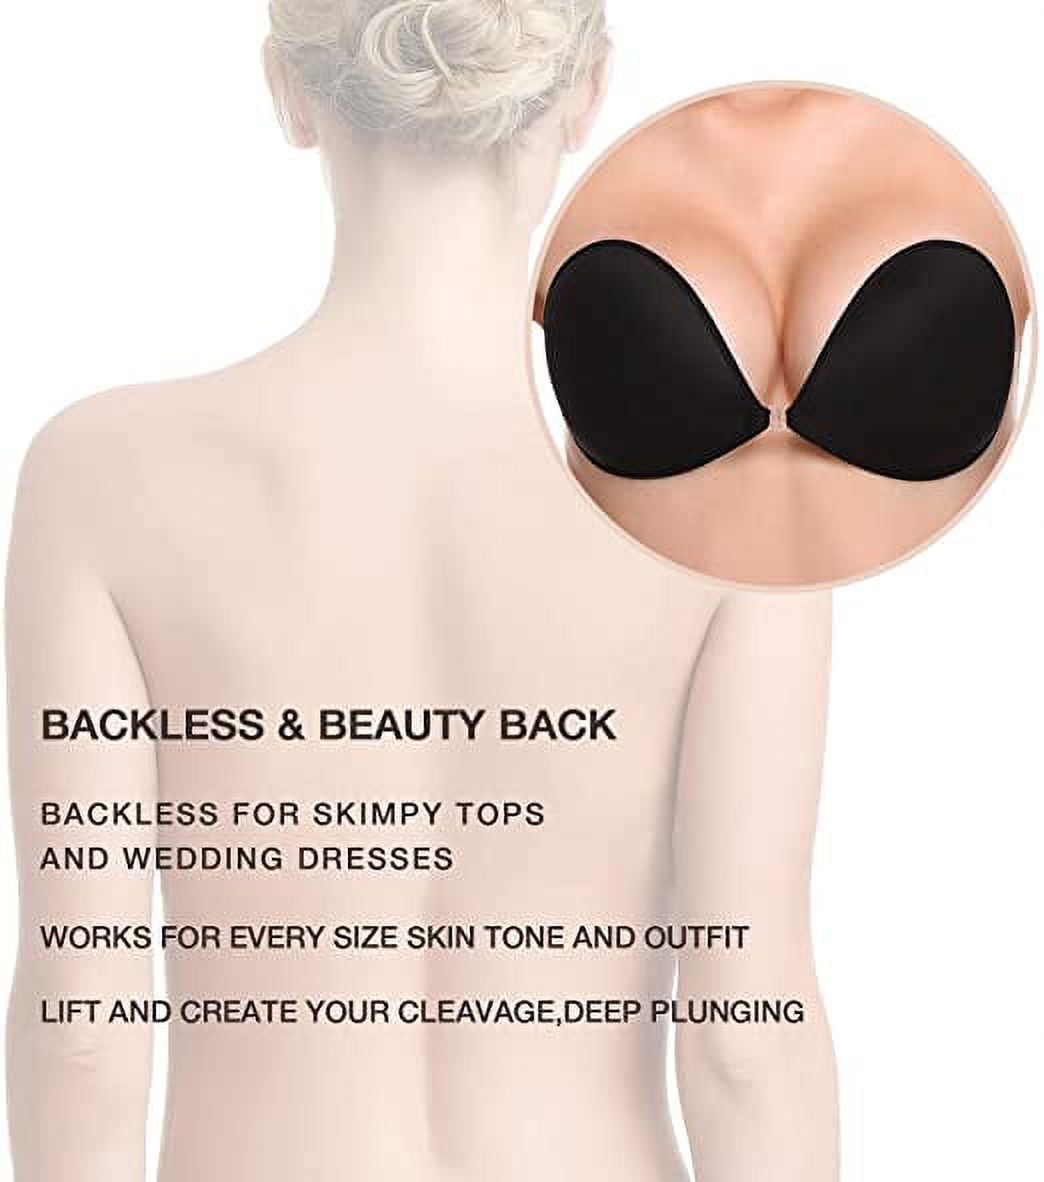 Cleavage Master Push-Up Invisible Bra for Women Sticky Wings Bra - Backless  and Strapless Push Up Bra (Cup A-D) - Skin-Friendly Adhesive and Stick on  Bra for Bar, Wedding, Party and Backless